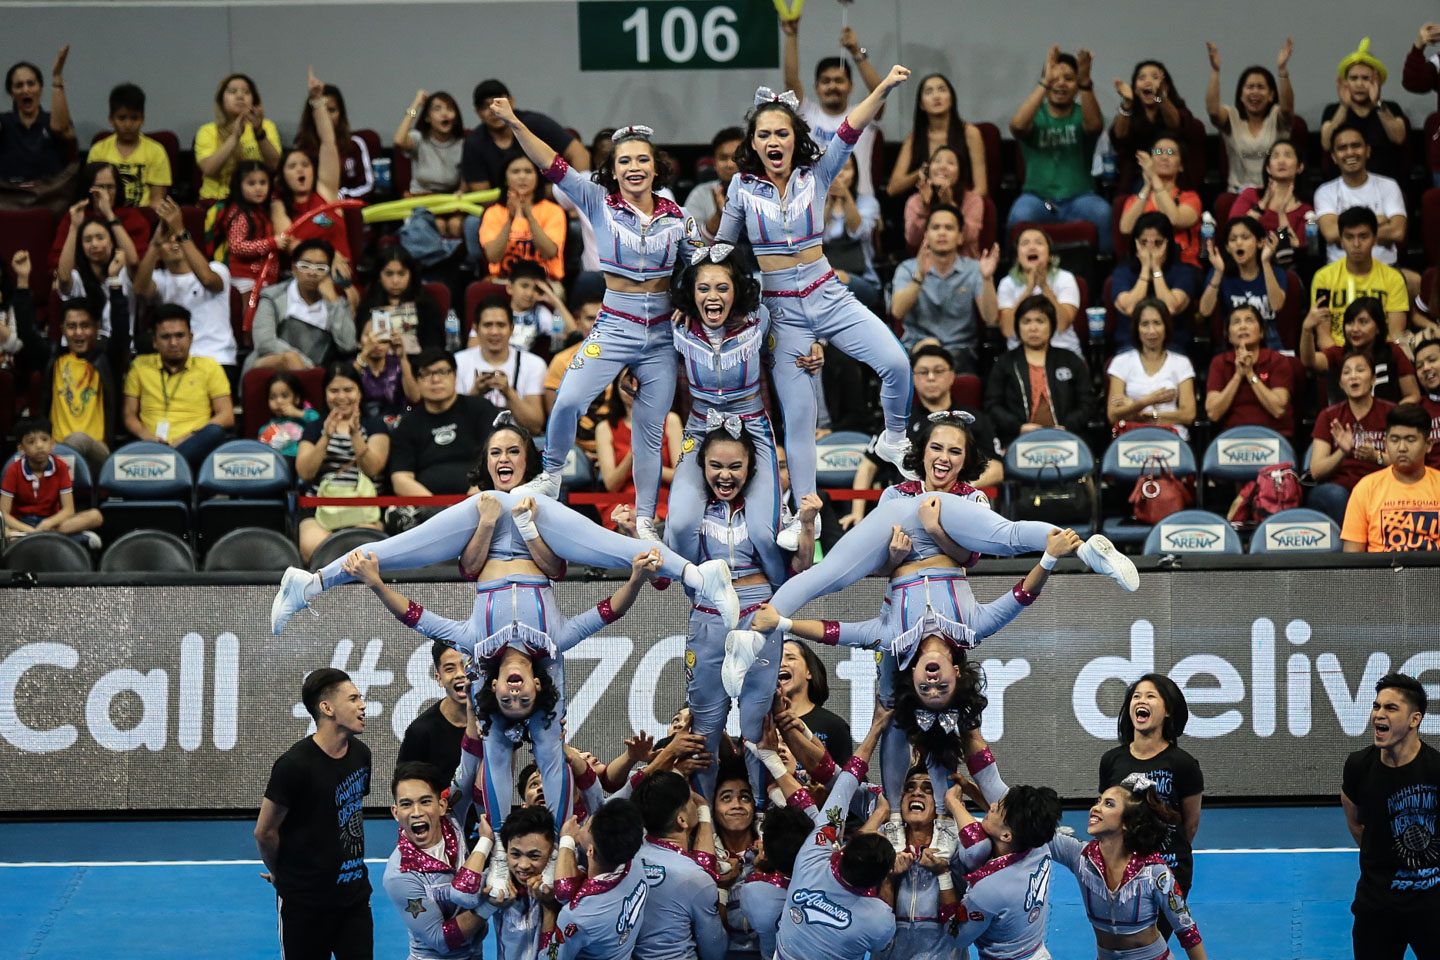 IN PHOTOS: UAAP Cheer dance competition 2017 highlights